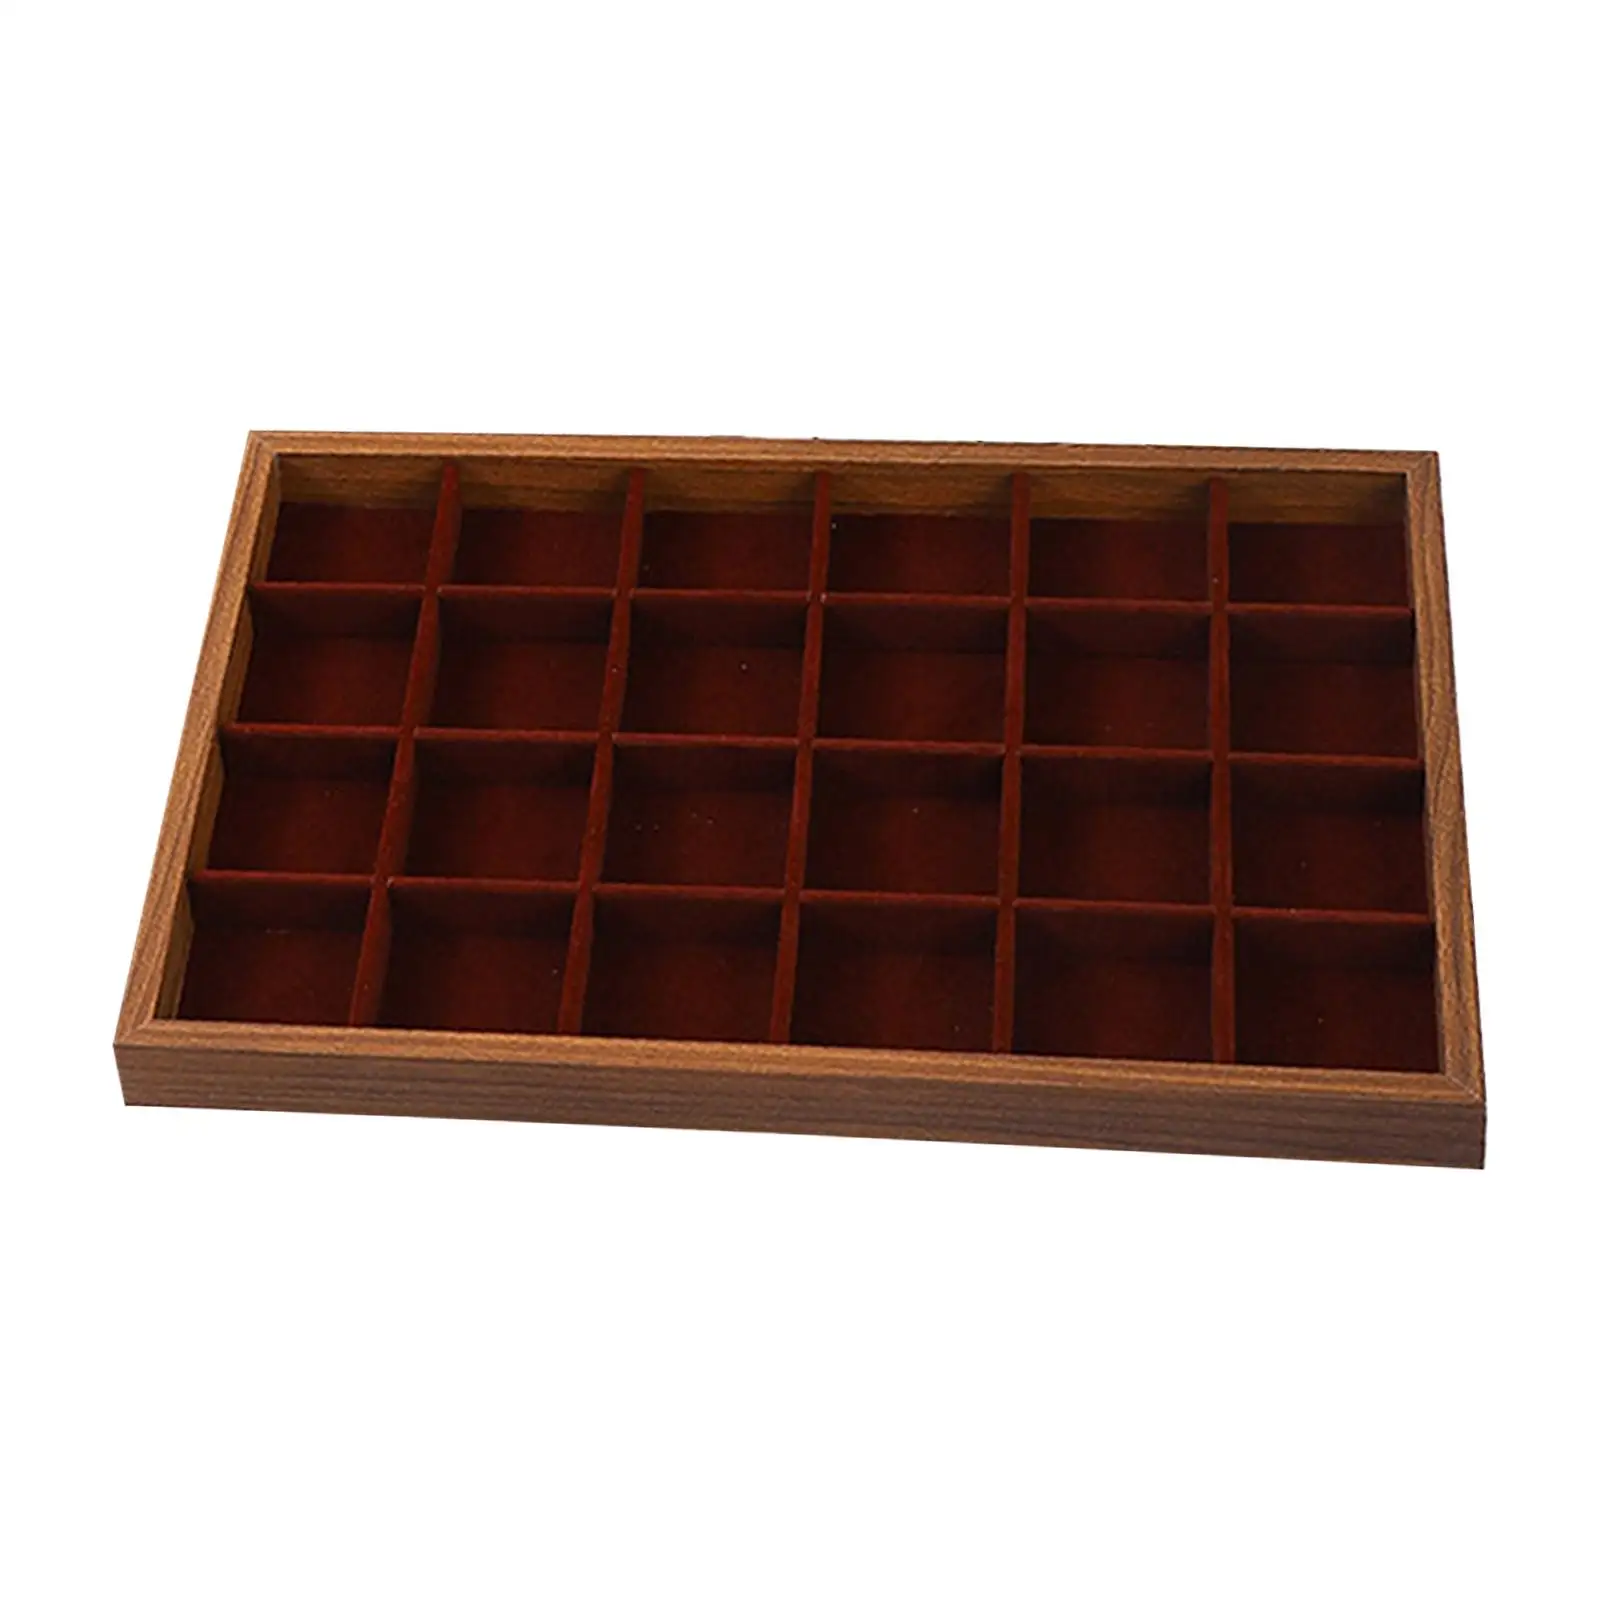 24 Grid Jewelry Drawer Organizer Tray Wood Jewelry Storage Box Case for Rings Necklaces Selling Show Earring Home Bedroom Drawer